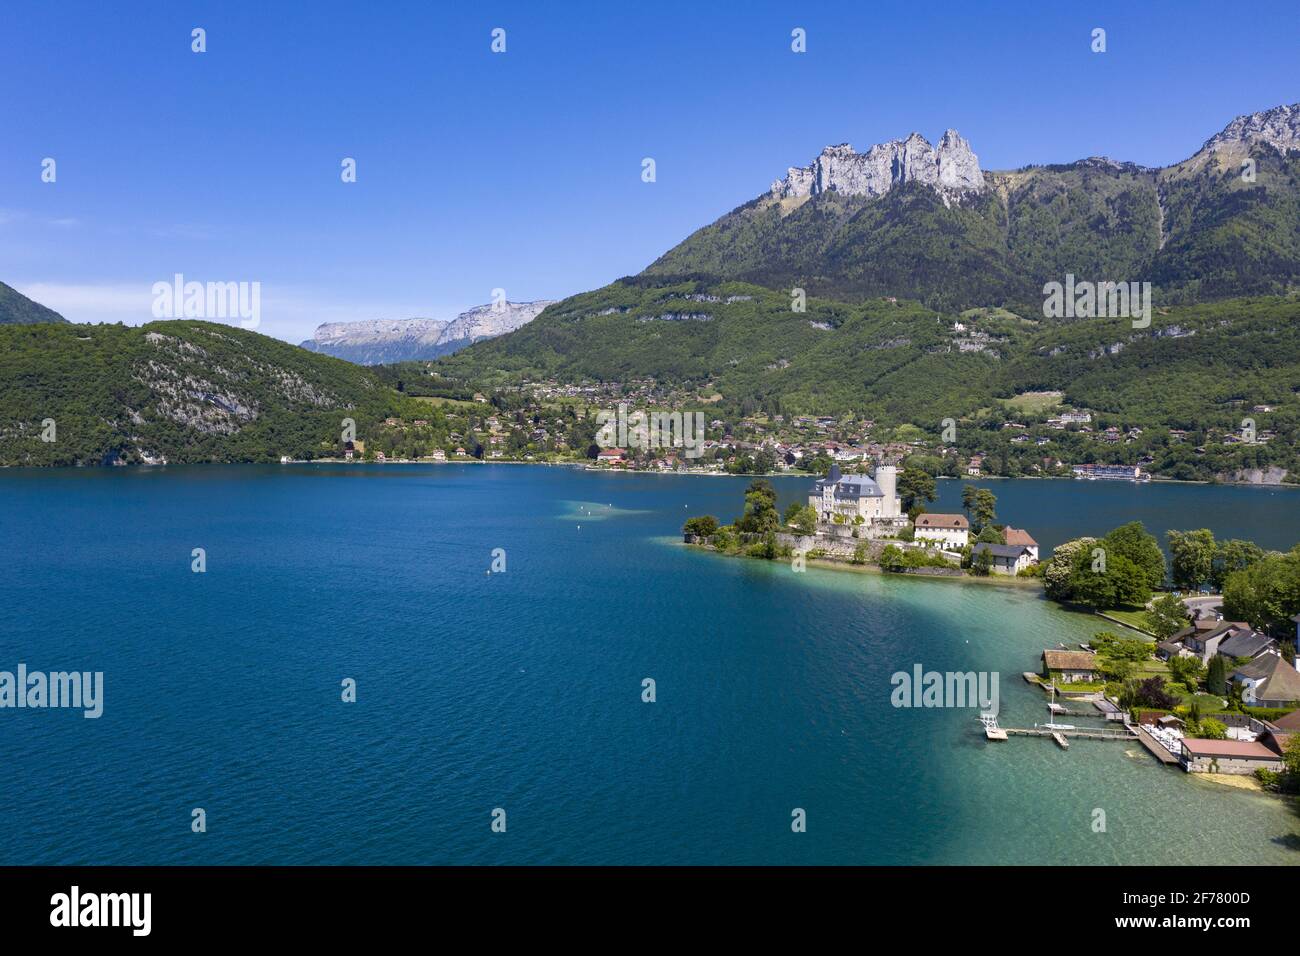 France, Haute Savoie, Annecy, view of the Duingt peninsula, the château de Duingt, and the lake Formerly called châteauvieux, the château de Duingt is built in front of the Roc de Chère on the shores of Lake Annecy It is an architectural gem that is located on a peninsula on the border between the Grand Lac and the Petit Lac d'Annecy This medieval fortress has existed for almost a millennium and offers summer cultural activities(aerial view Stock Photo